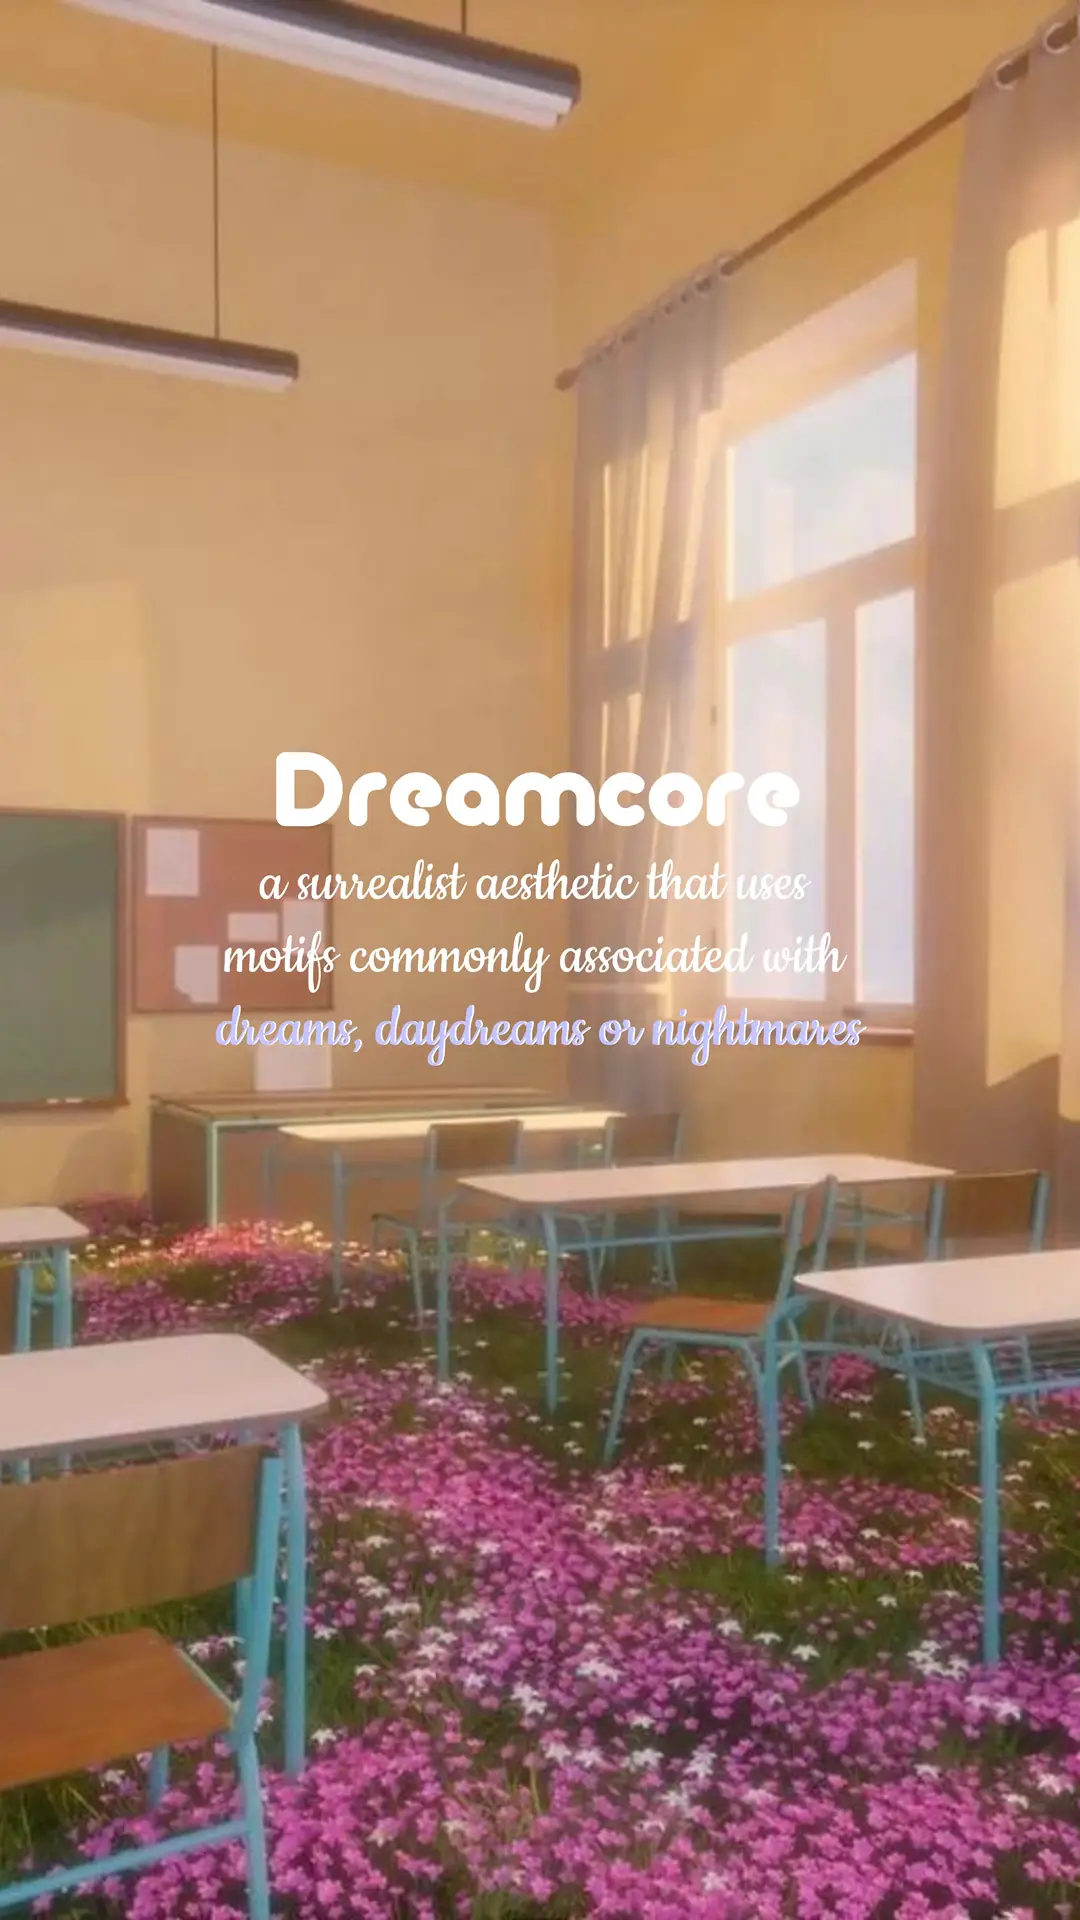 What is dreamcore on TikTok and what does it mean?